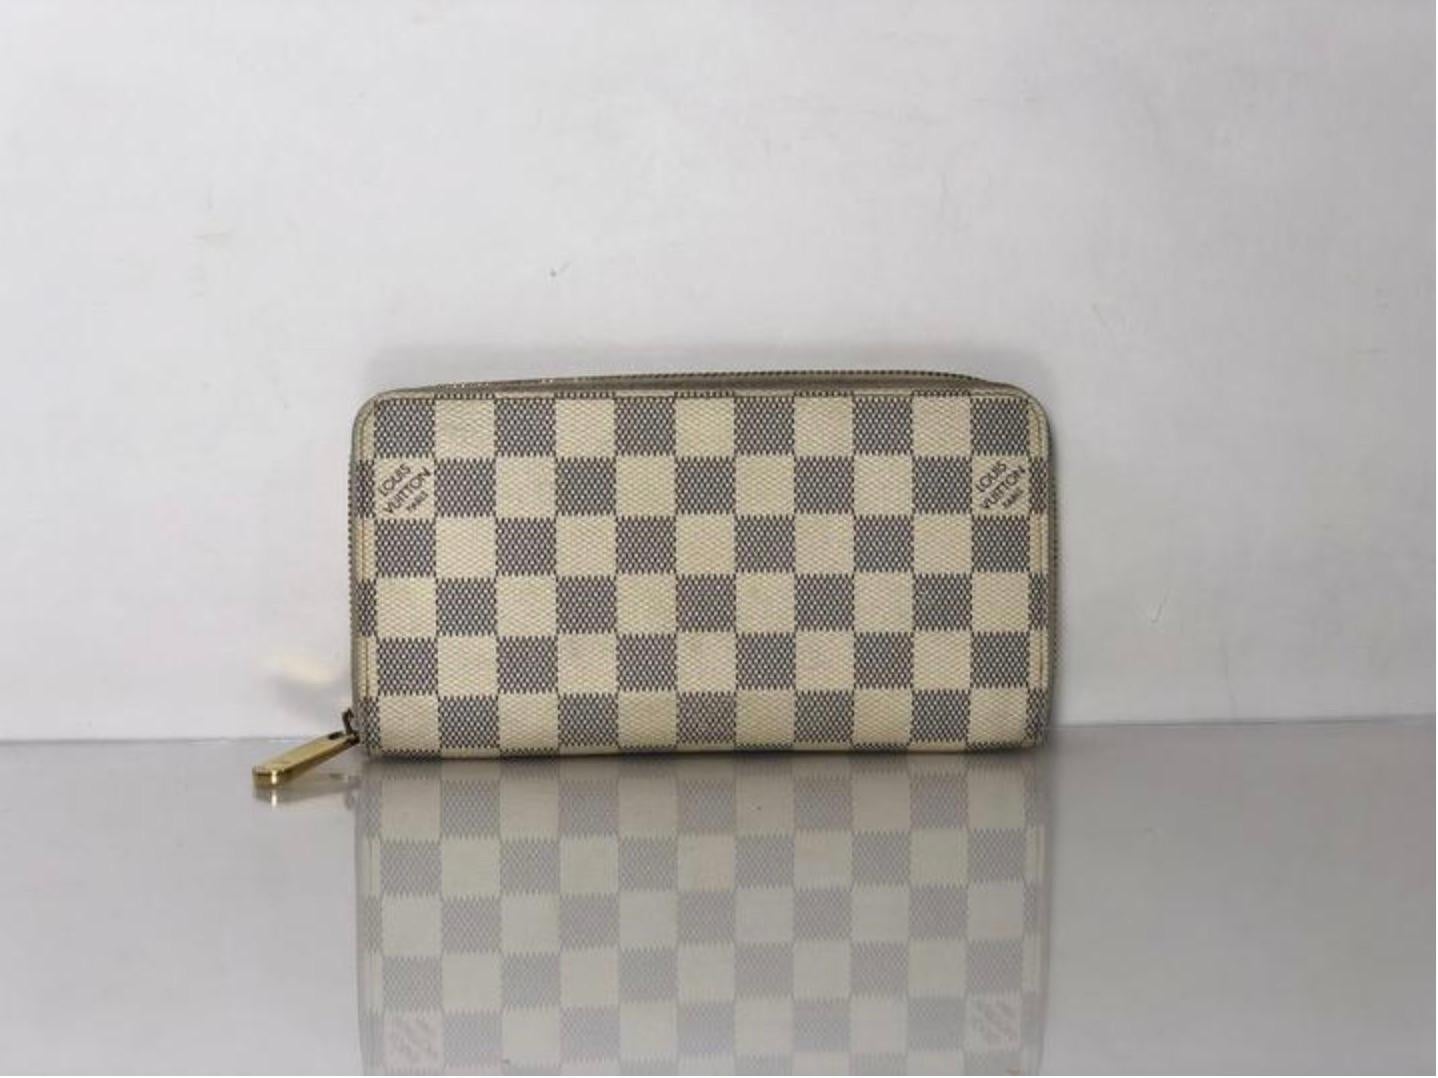  Louis Vuitton Damier Azur Zippy Wallet In Good Condition For Sale In Saint Charles, IL